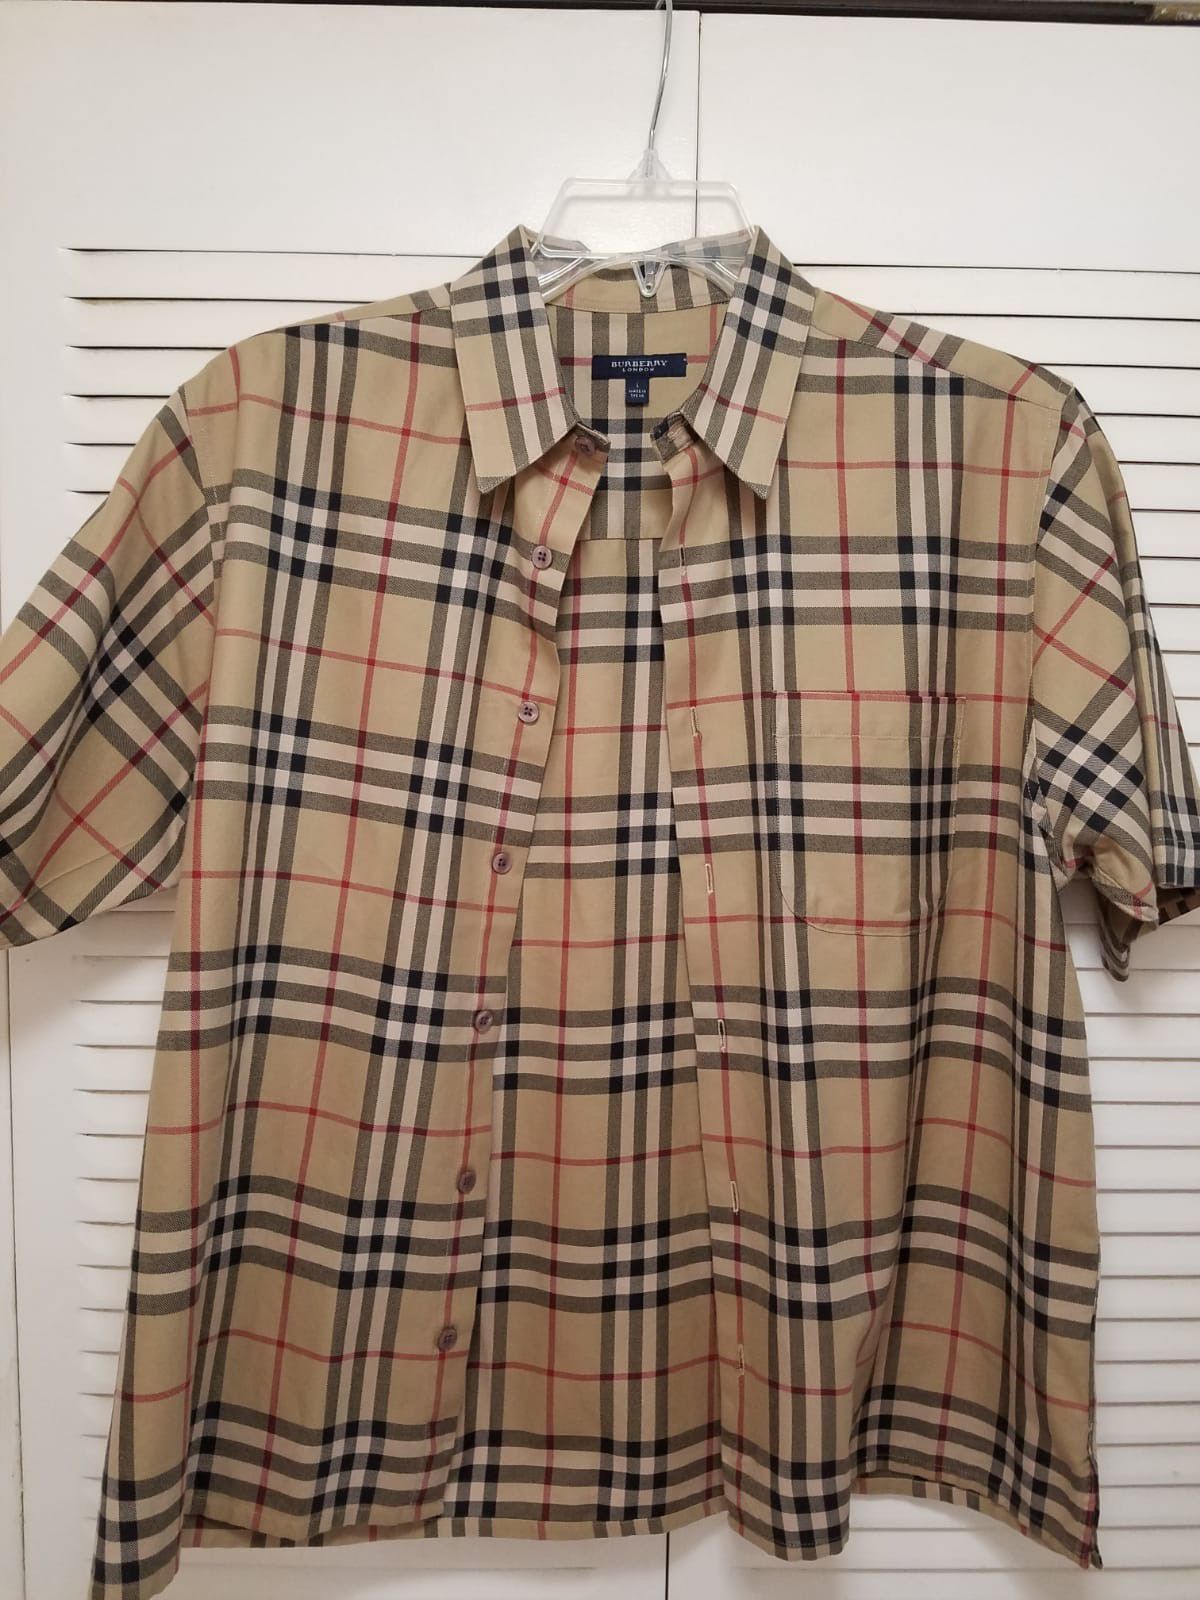 NEW Burberry check short sleeve button shirt AUTHENTIC made in UK